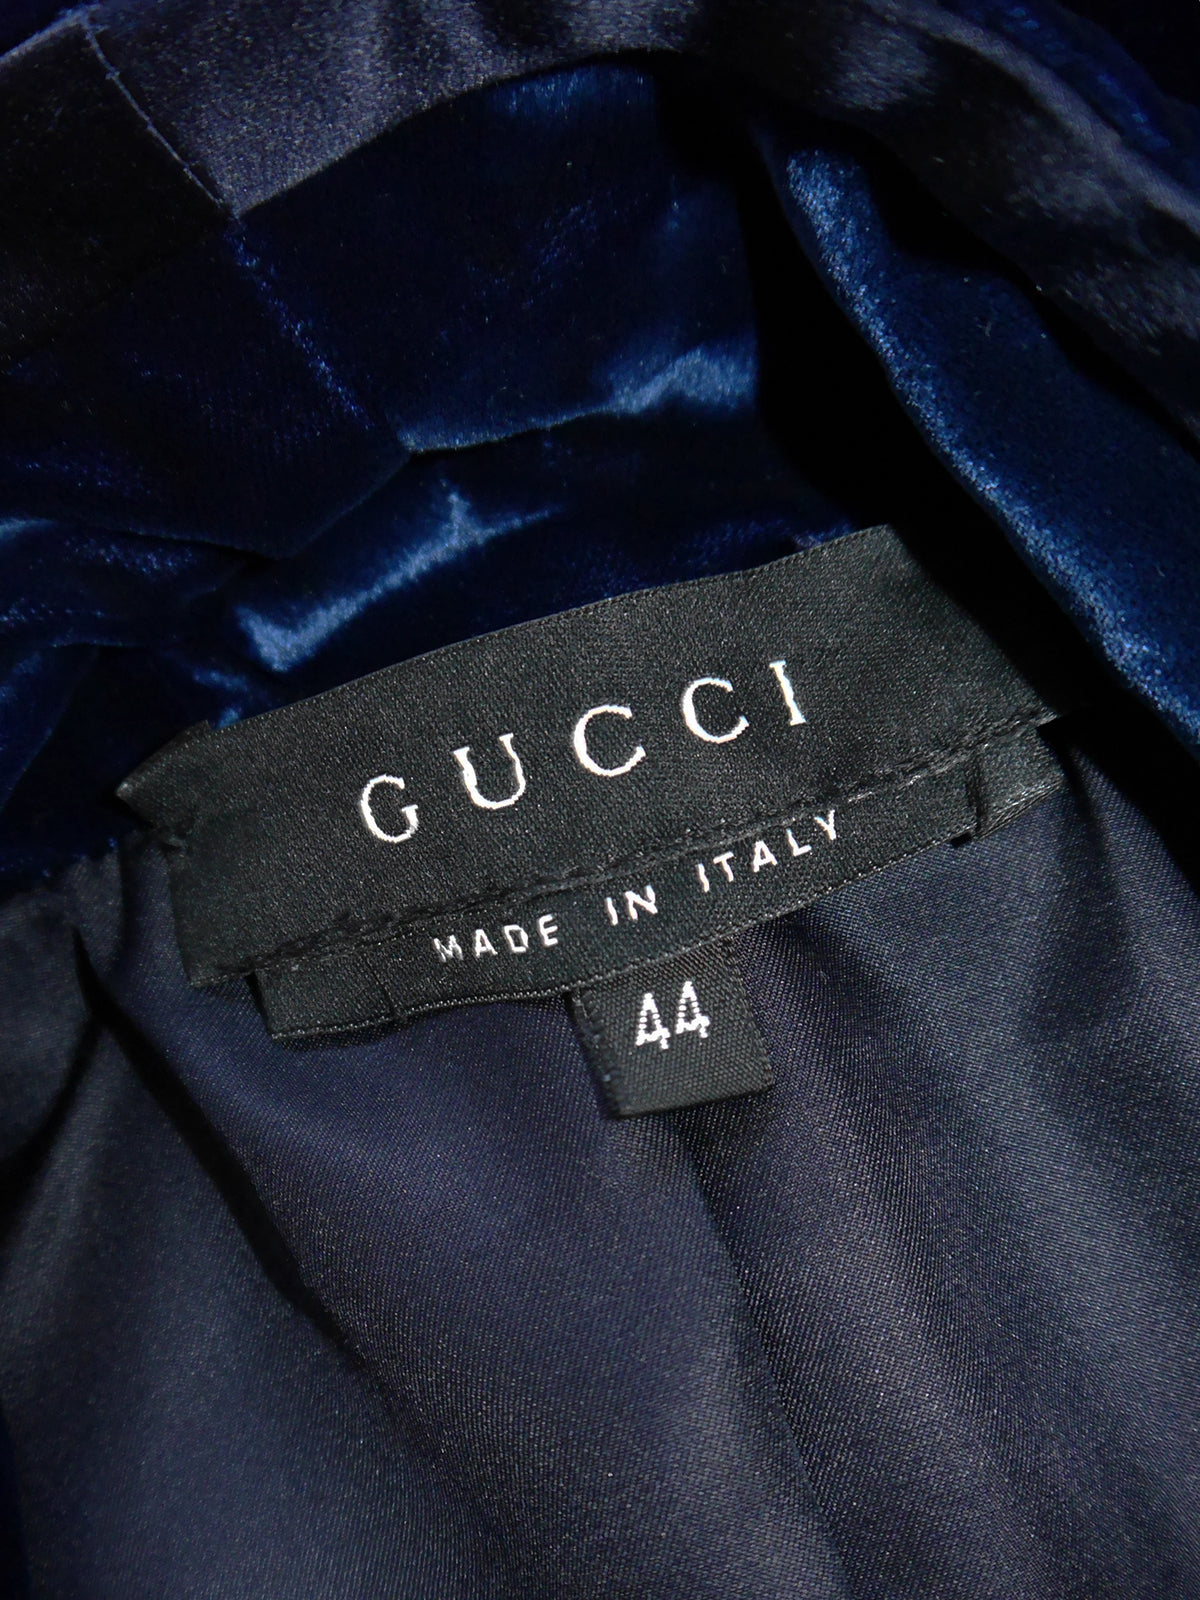 GUCCI by Tom Ford Fall 2004 Vintage Blue Velvet Tuxedo Smoking Jacket